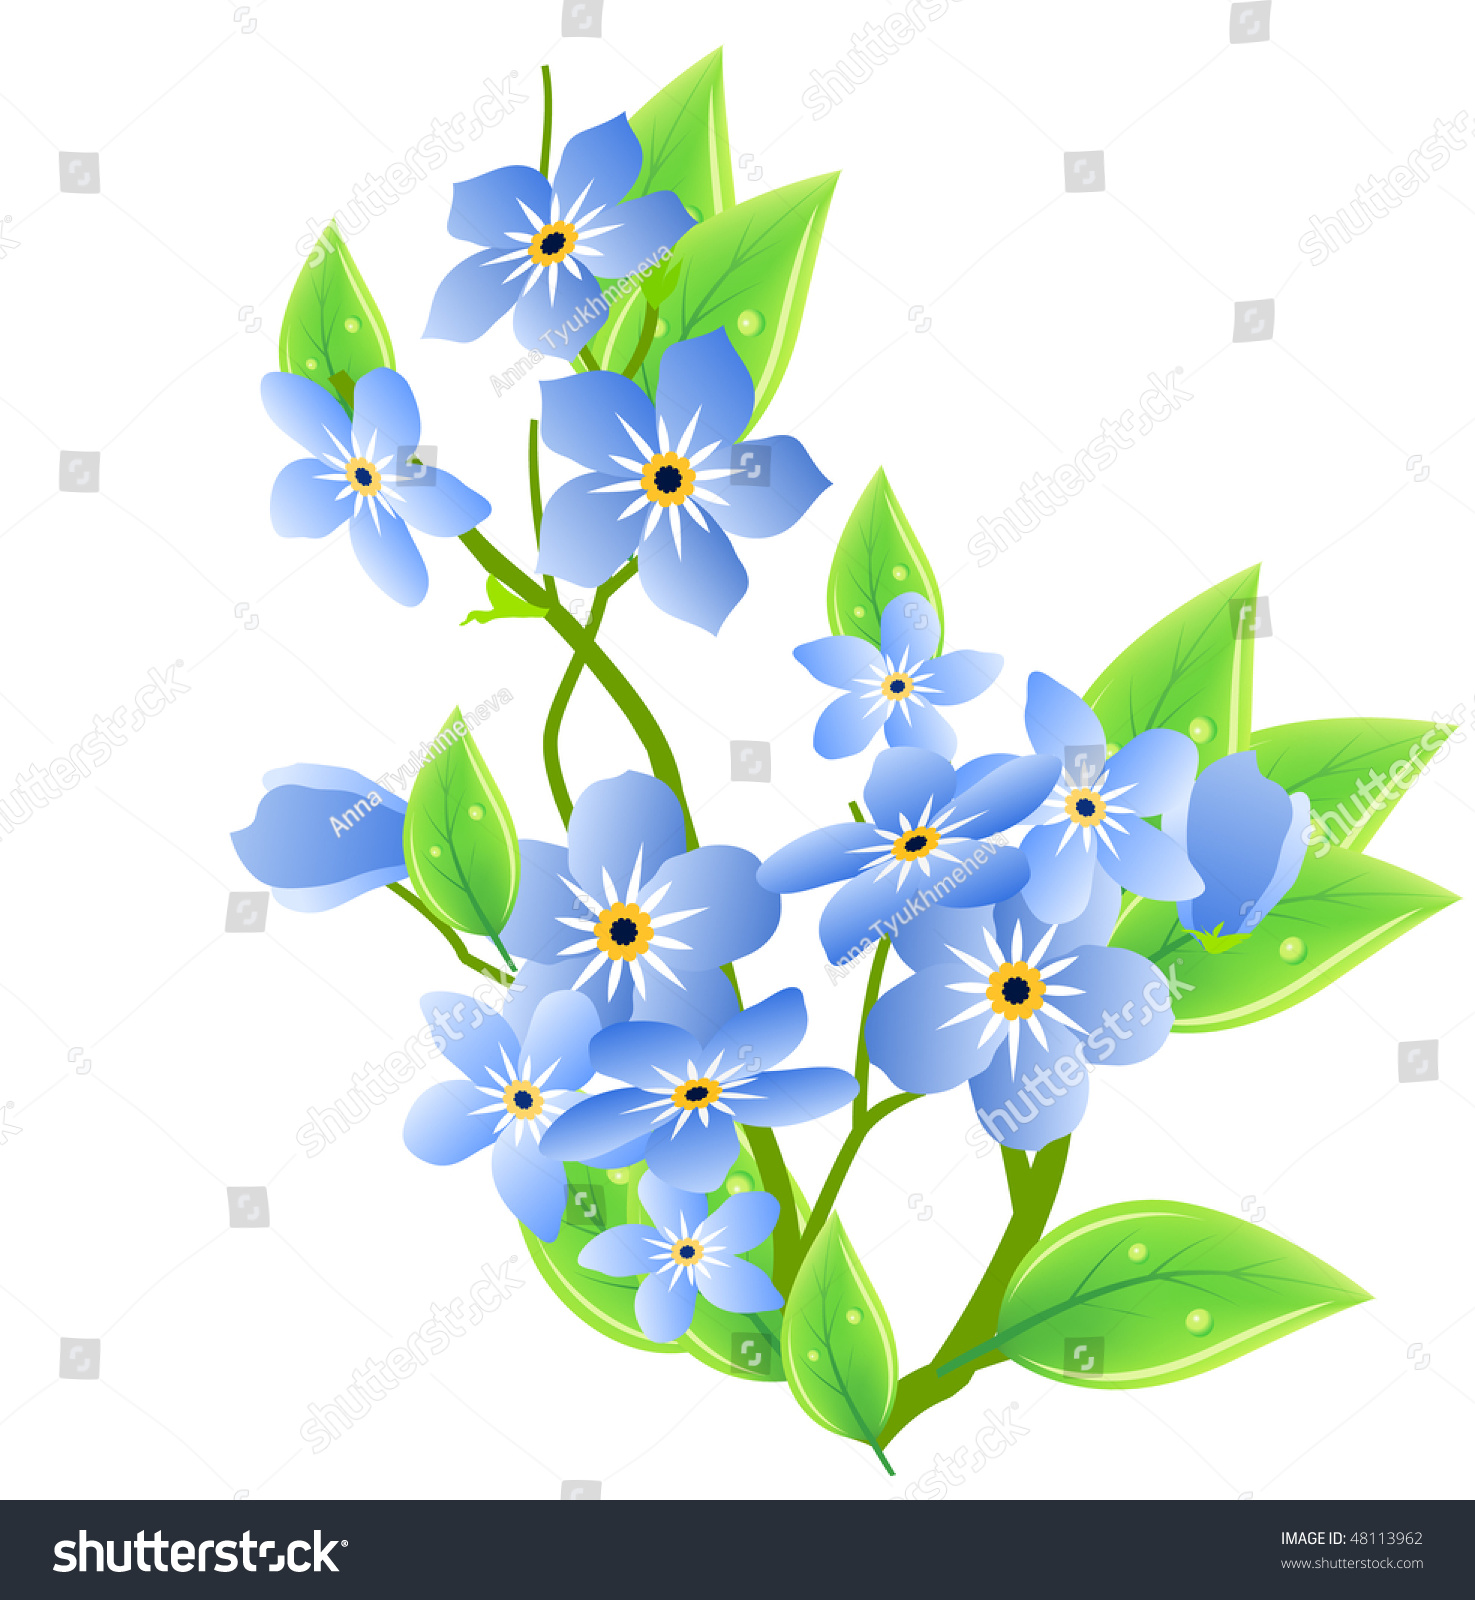 clip art forget me not flower - photo #24